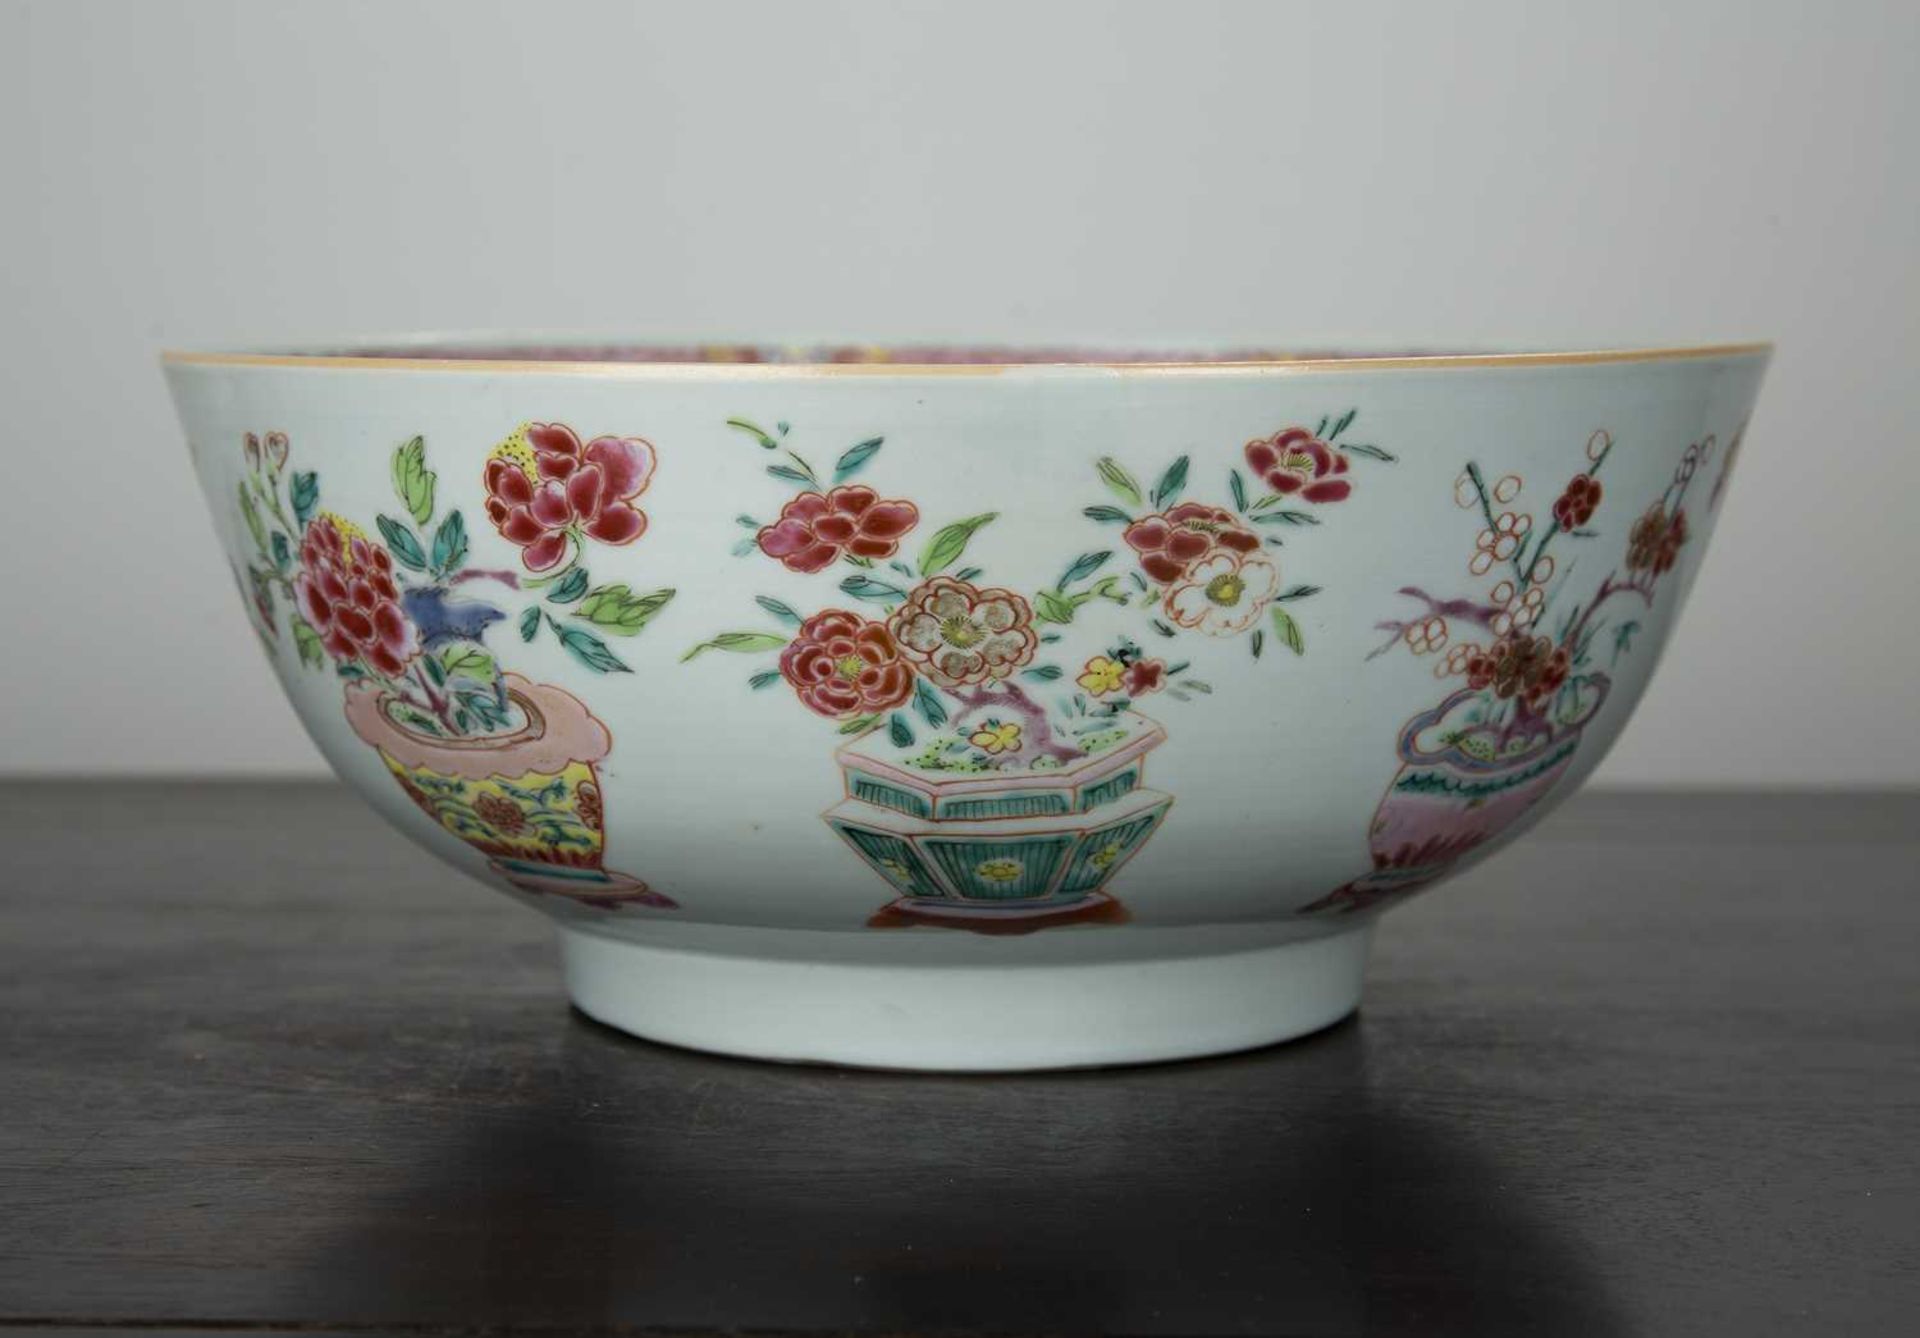 Famille rose bowl Chinese, 18th Century painted in enamels with baskets of flowers around the edge - Image 2 of 6